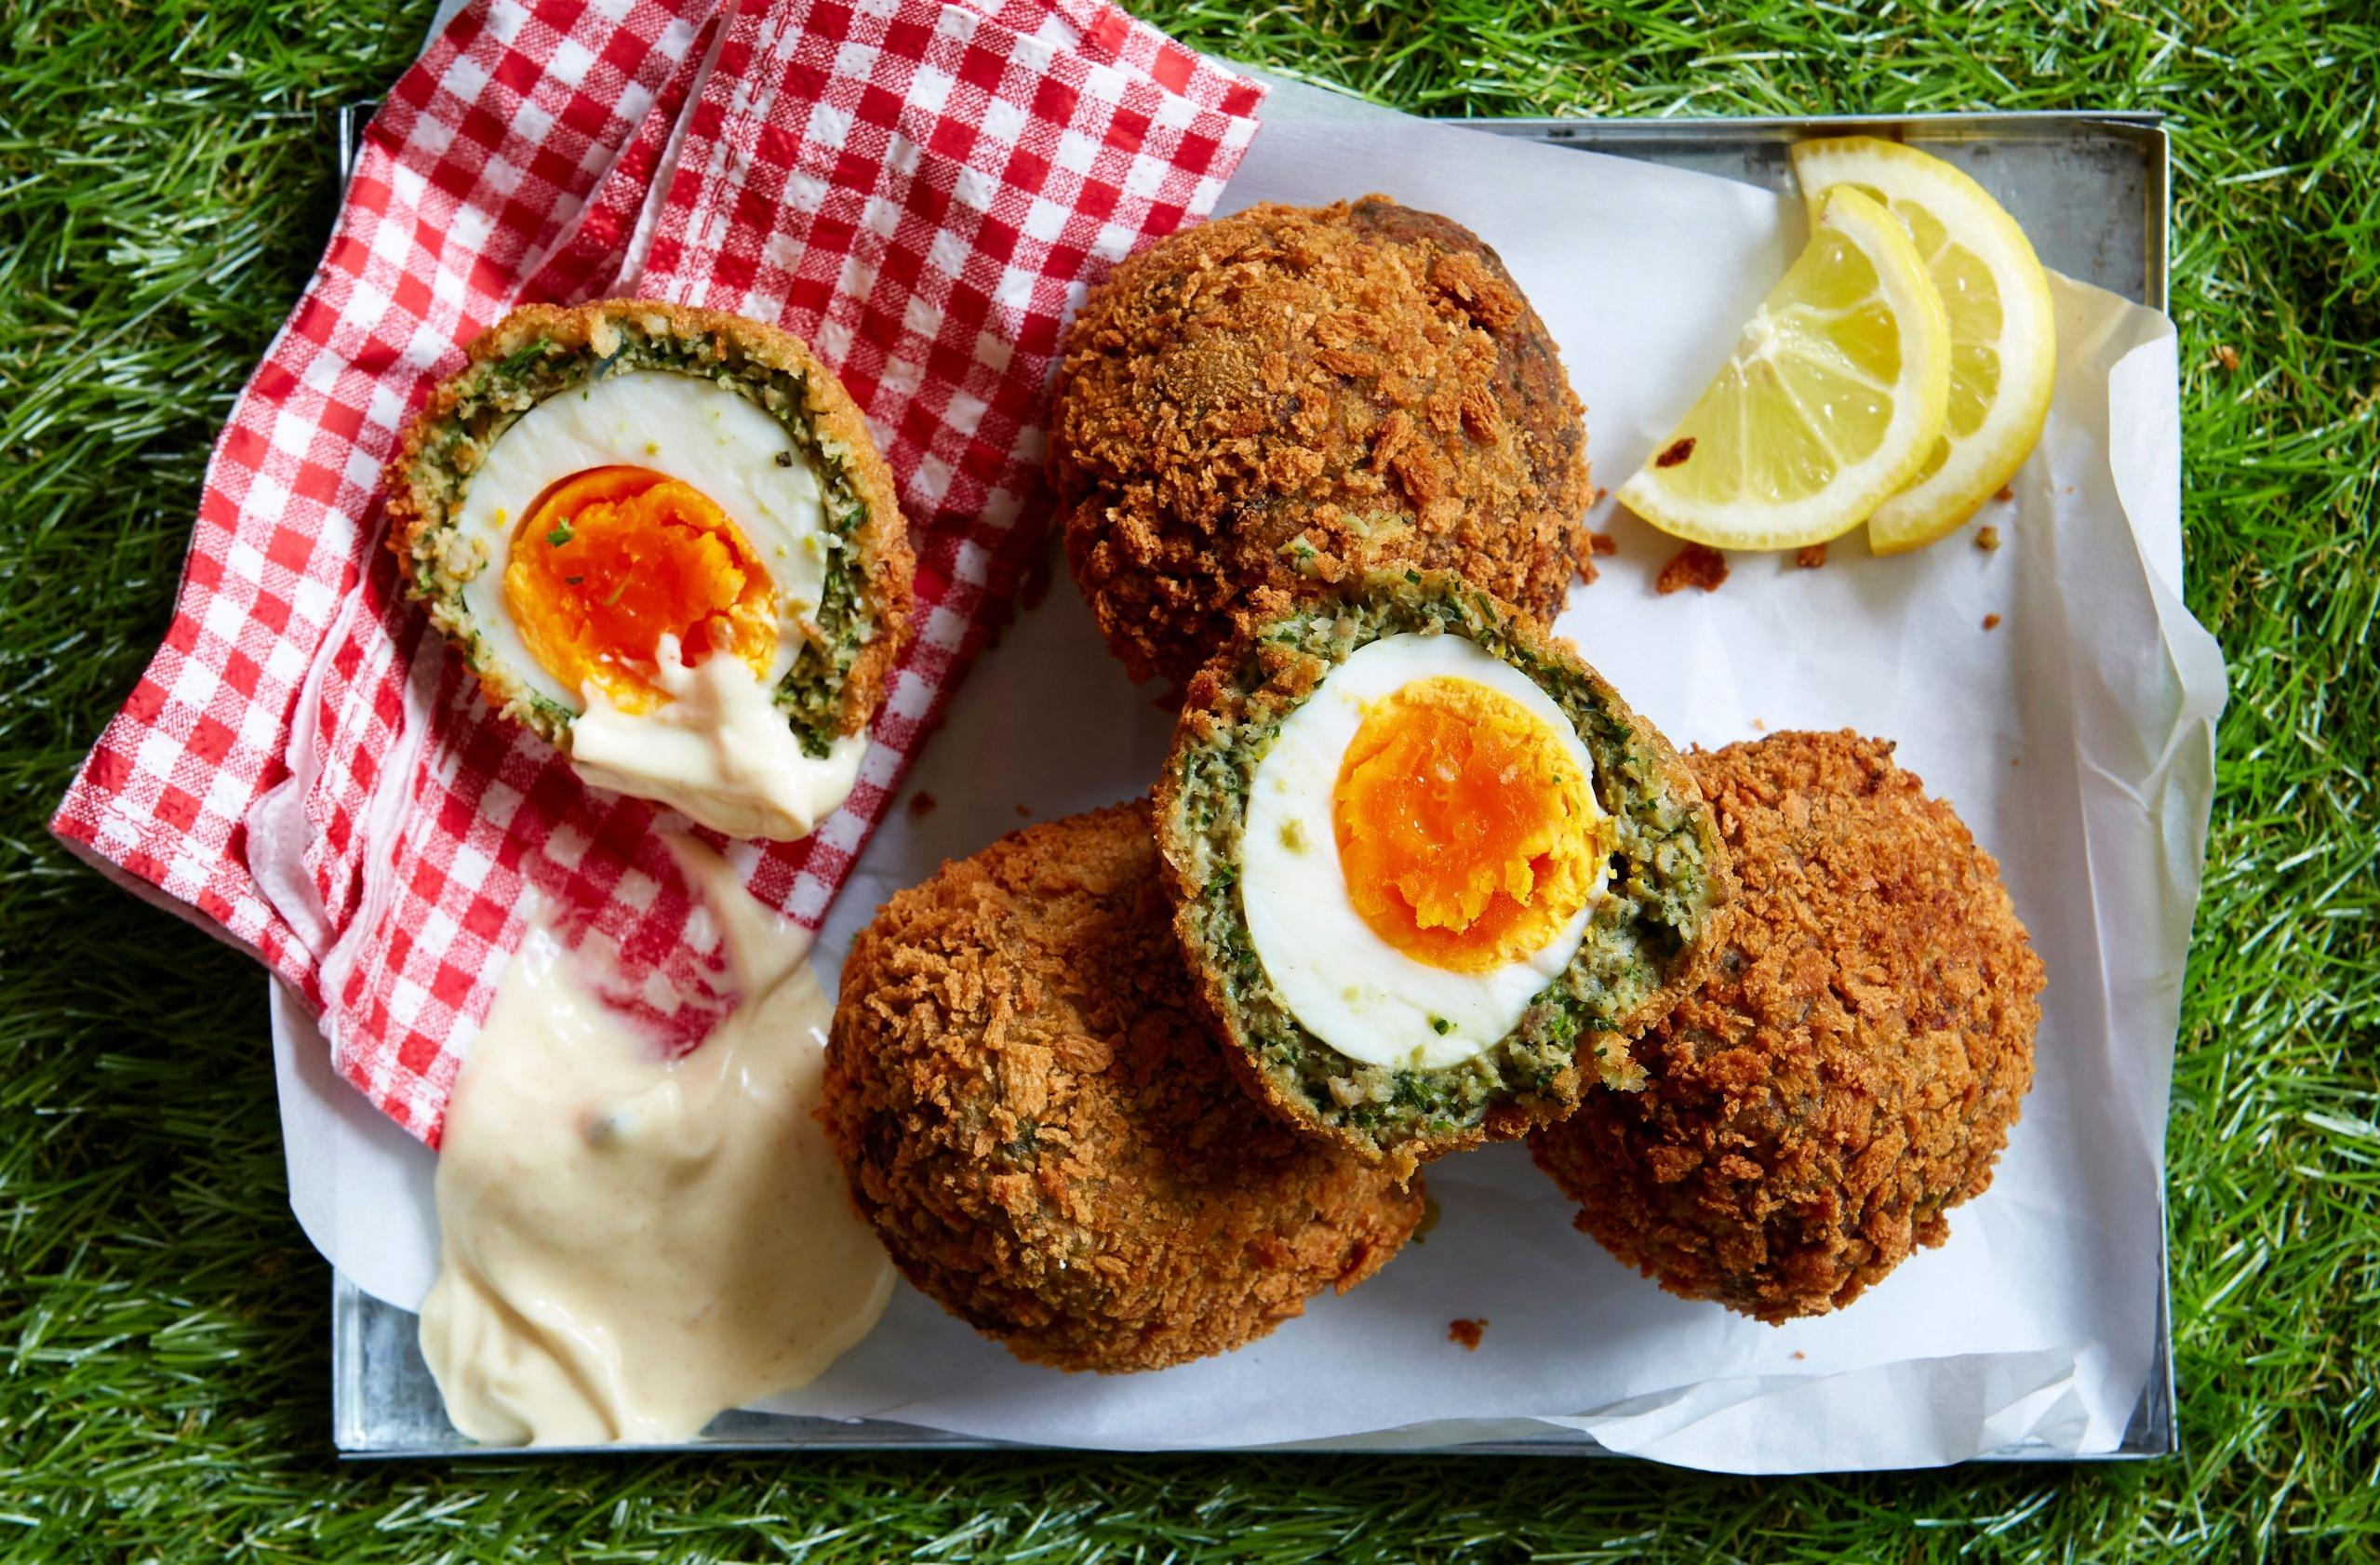  Who says plant-based eating can't be indulgent? These Vegan Scotch Eggs will prove them wrong.